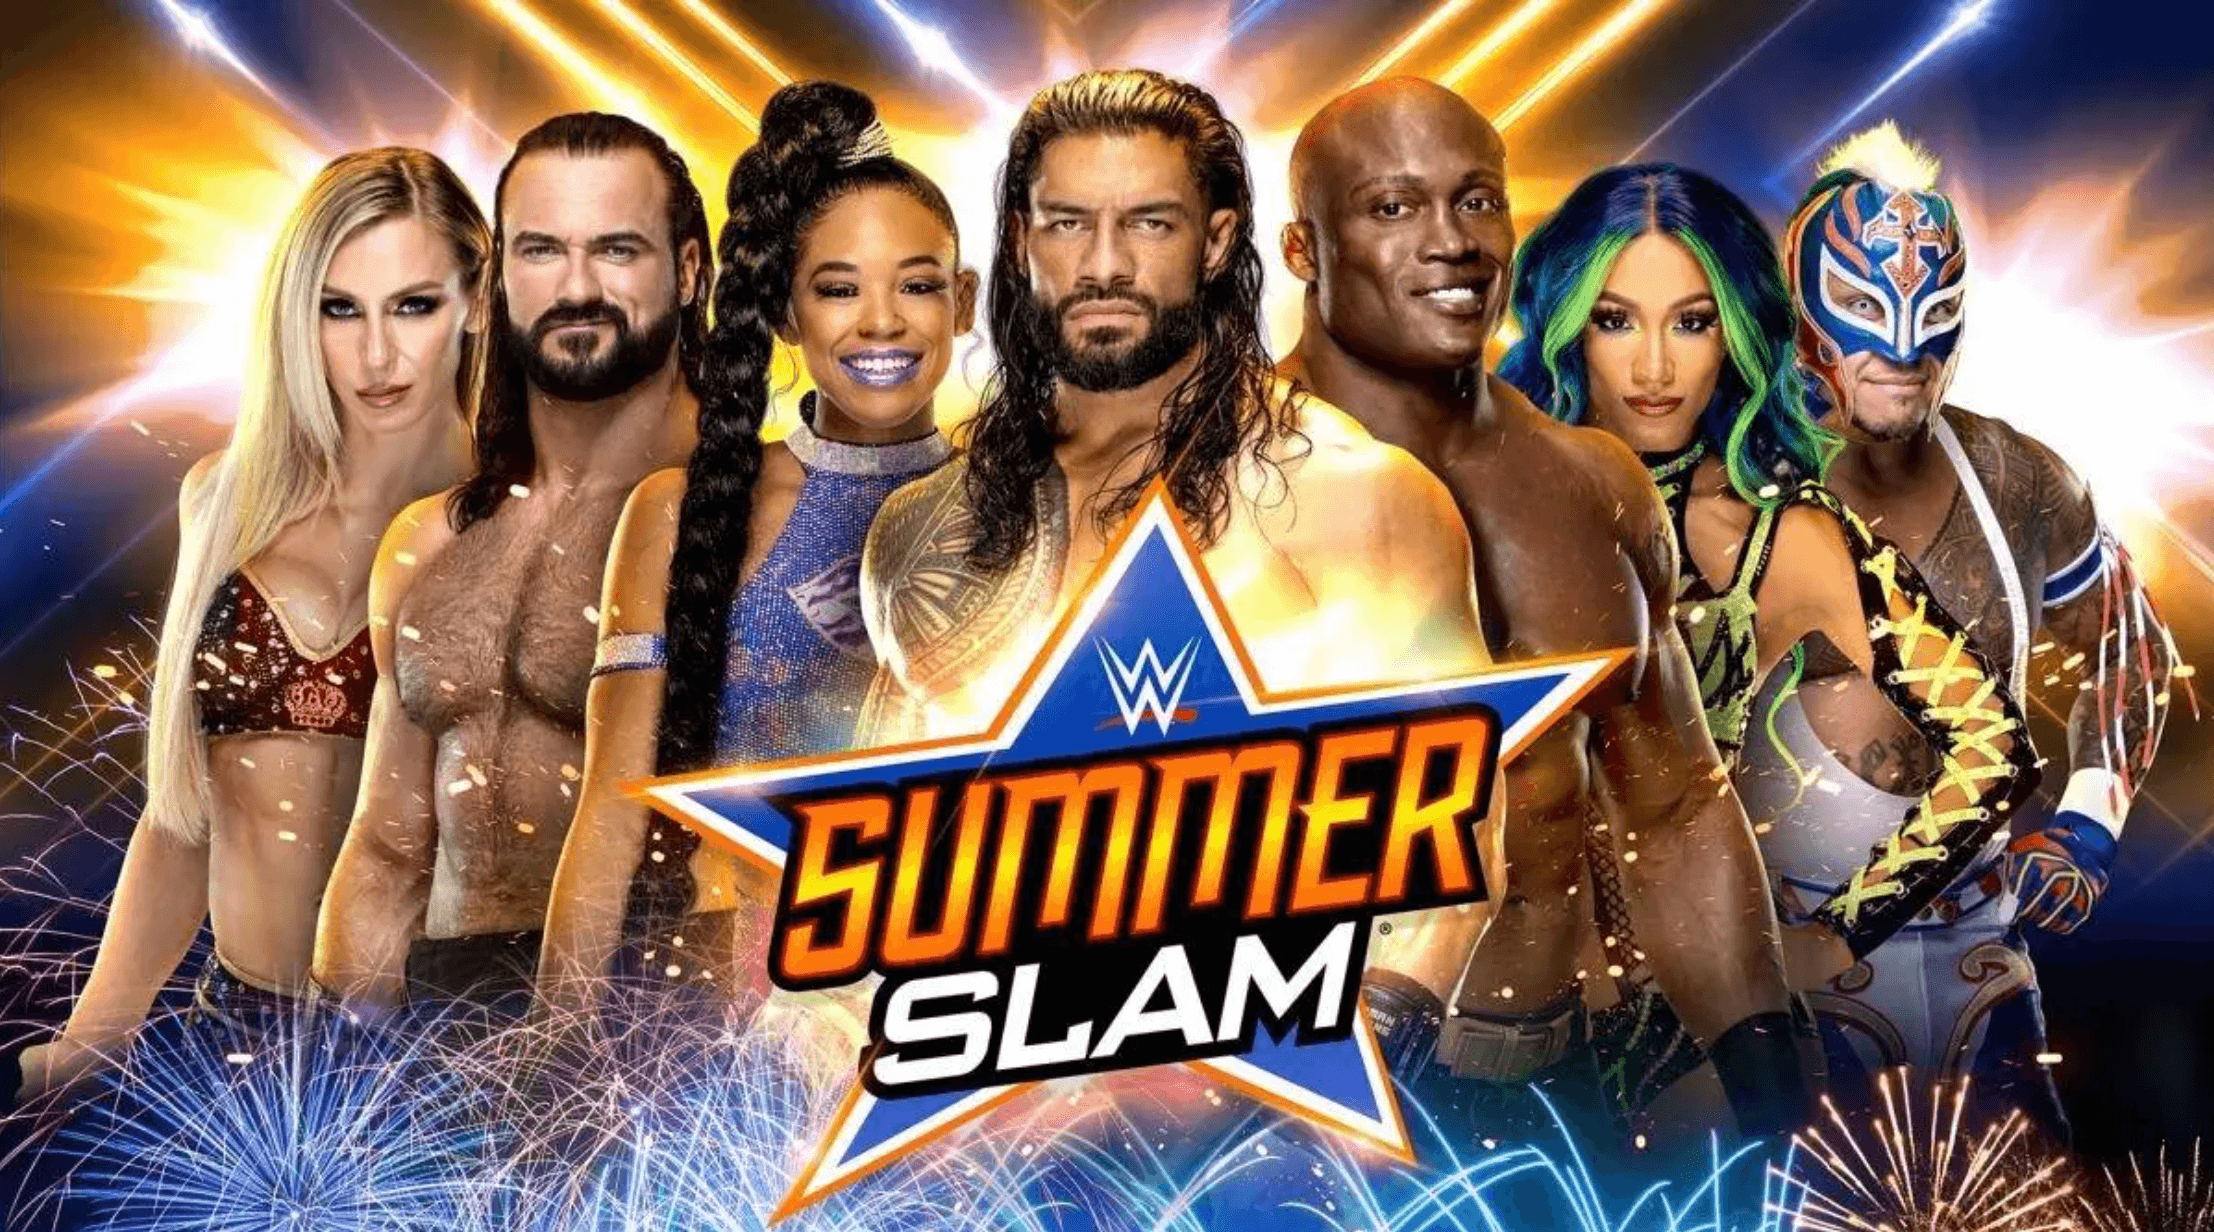 How to Watch SummerSlam 2021 Without Cable on August 21